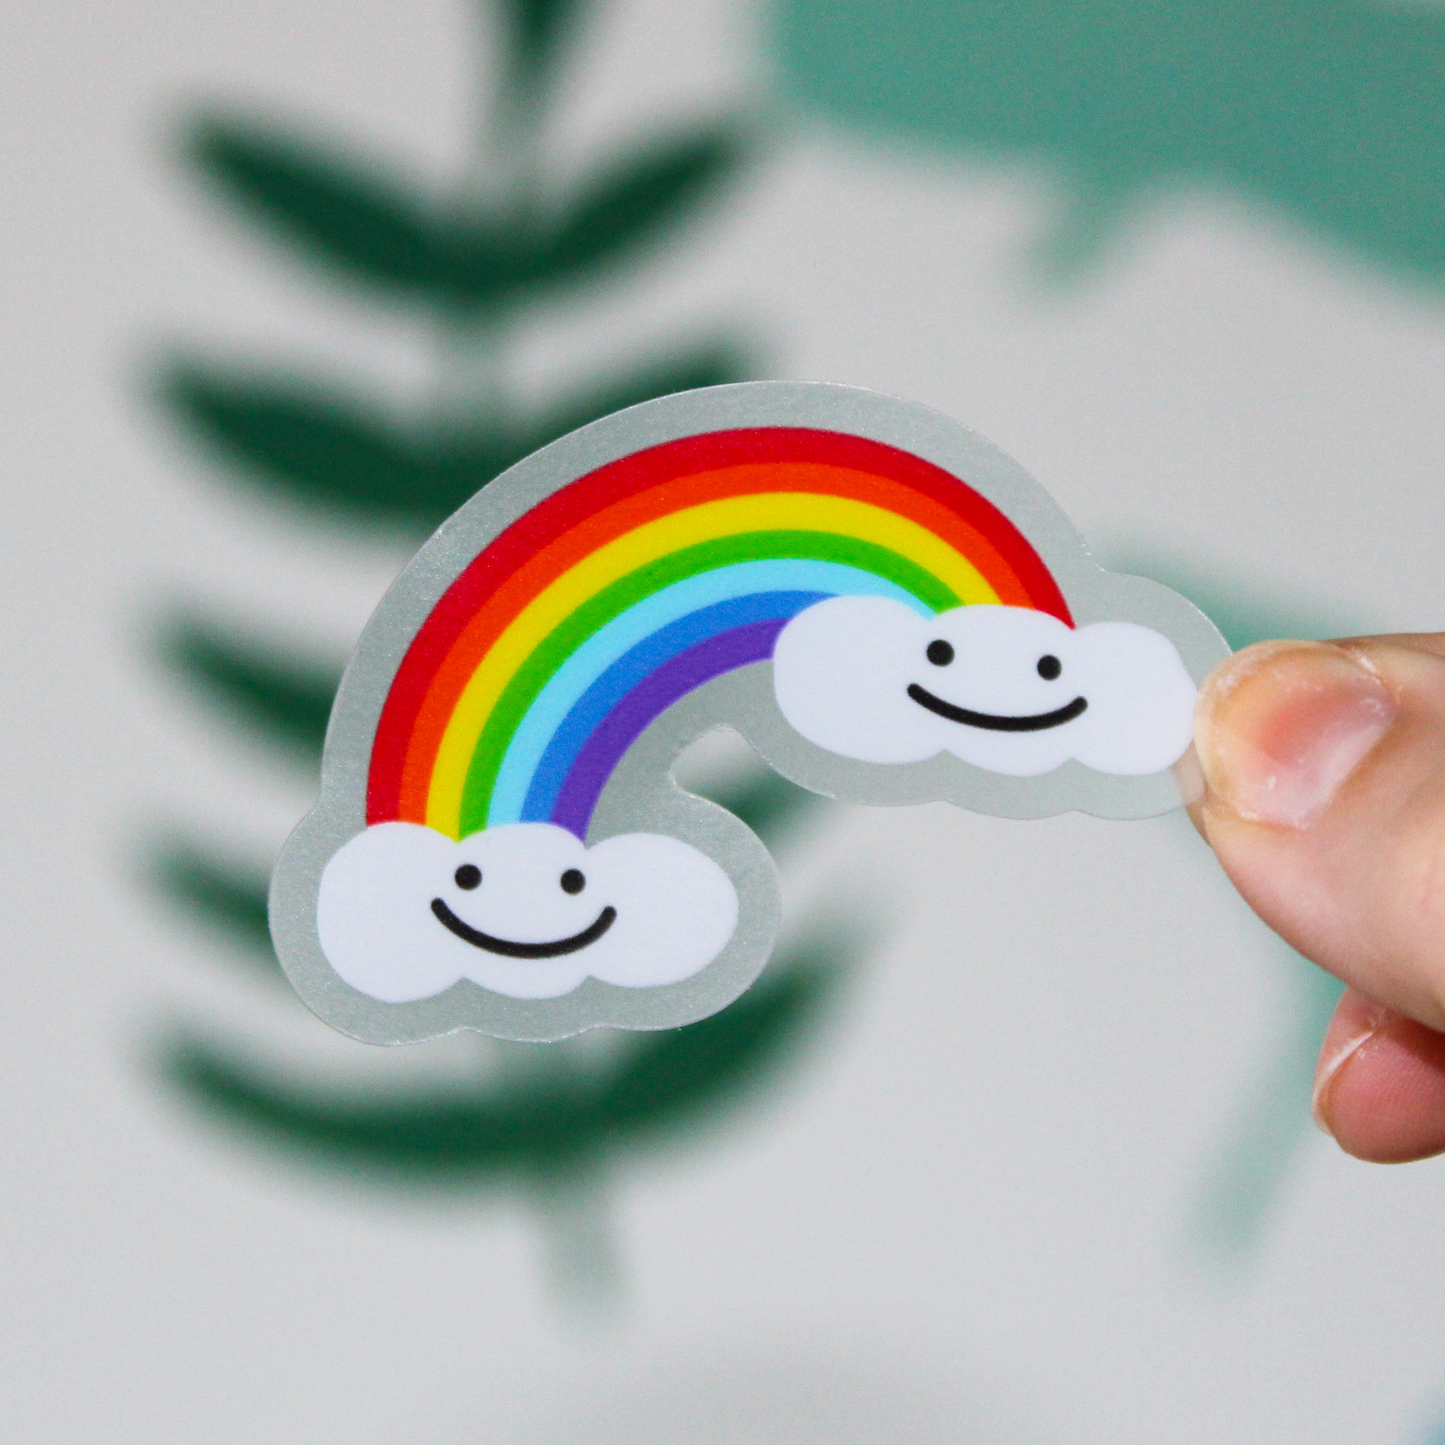 A blurred leaf background. In the front is a hand holding a sticker that has a rainbow with two clouds on either end smiling.